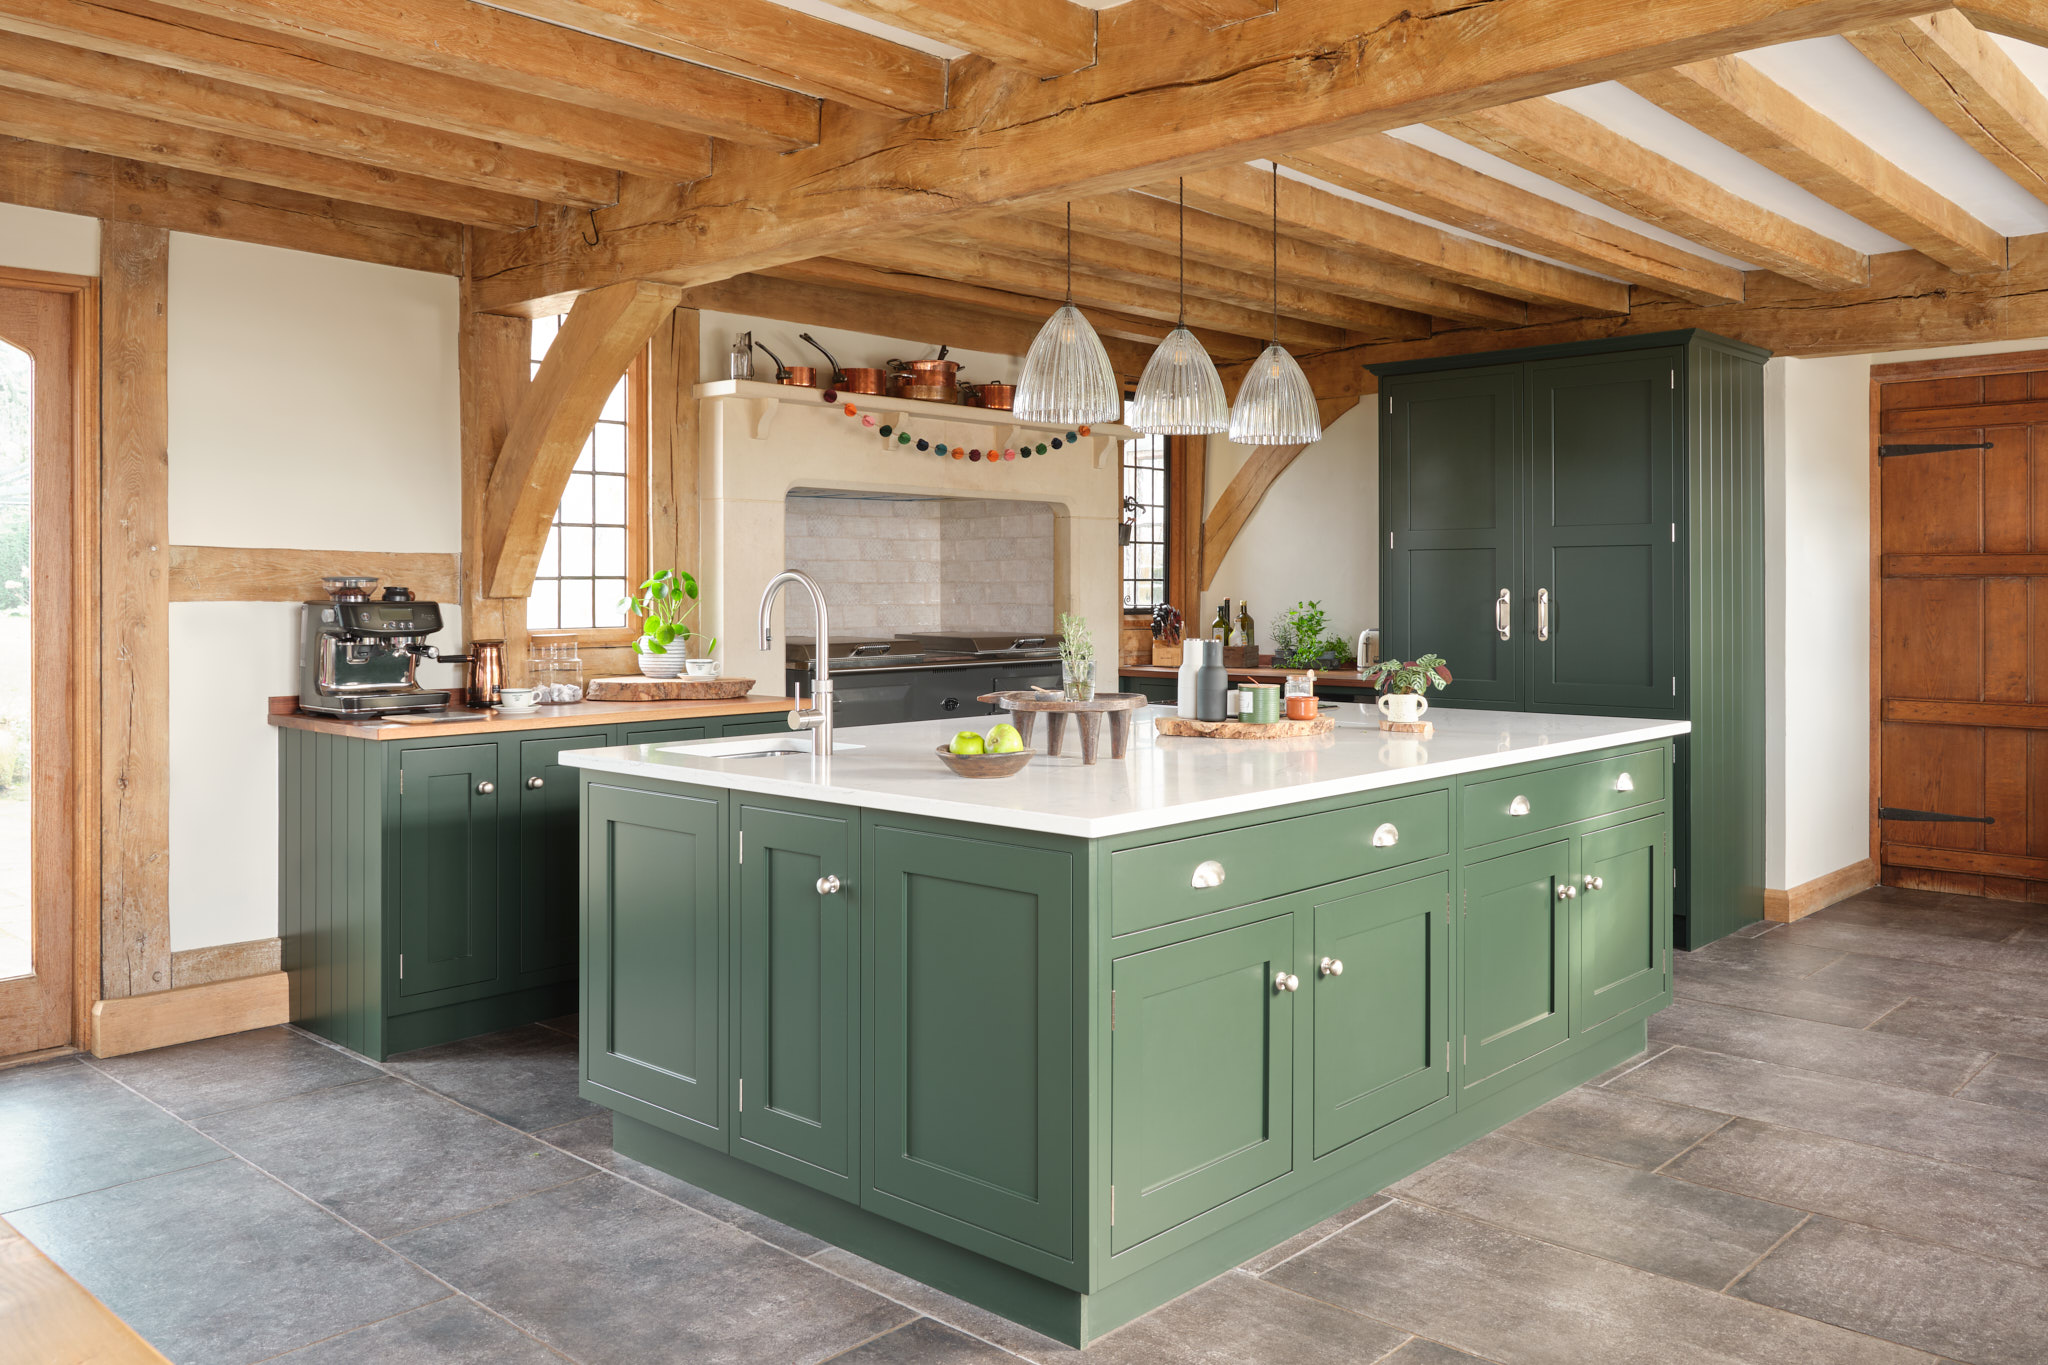 Green kitchen ideas: Decorating with shades from sage to forest green - The  English Home